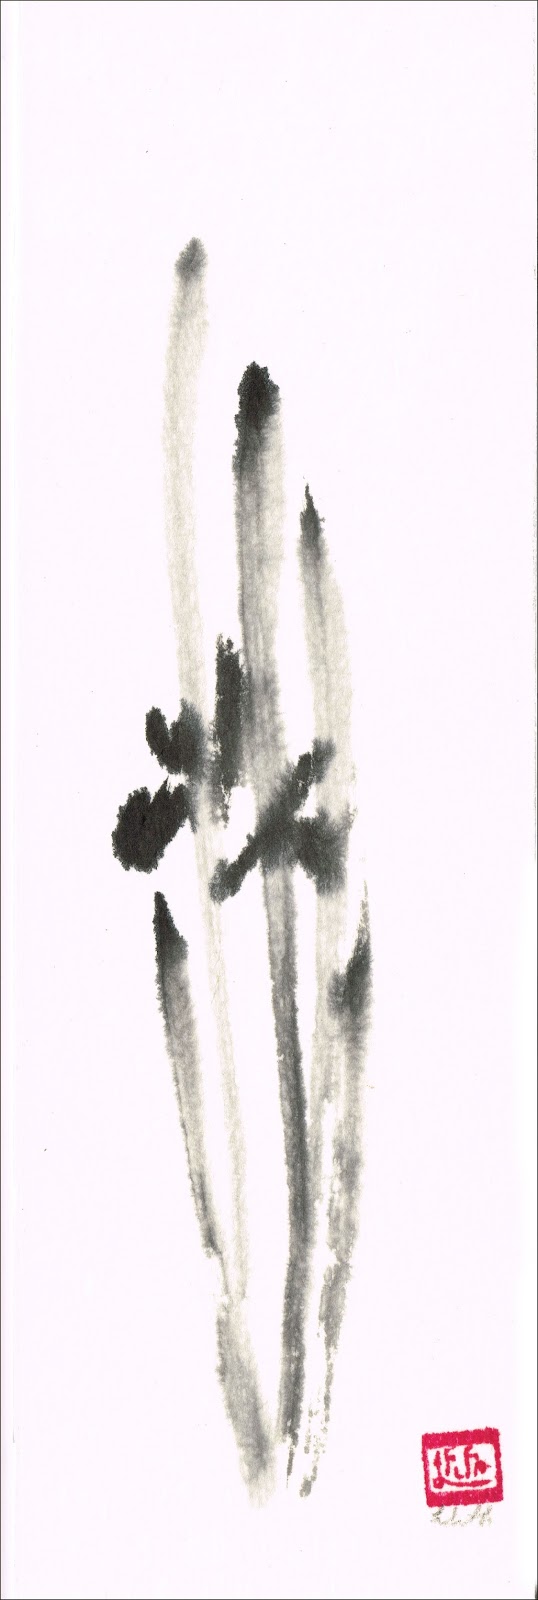 A sumi-e calligraphy painting including black ink as a compliment to the article on "Beyond the Appearances"